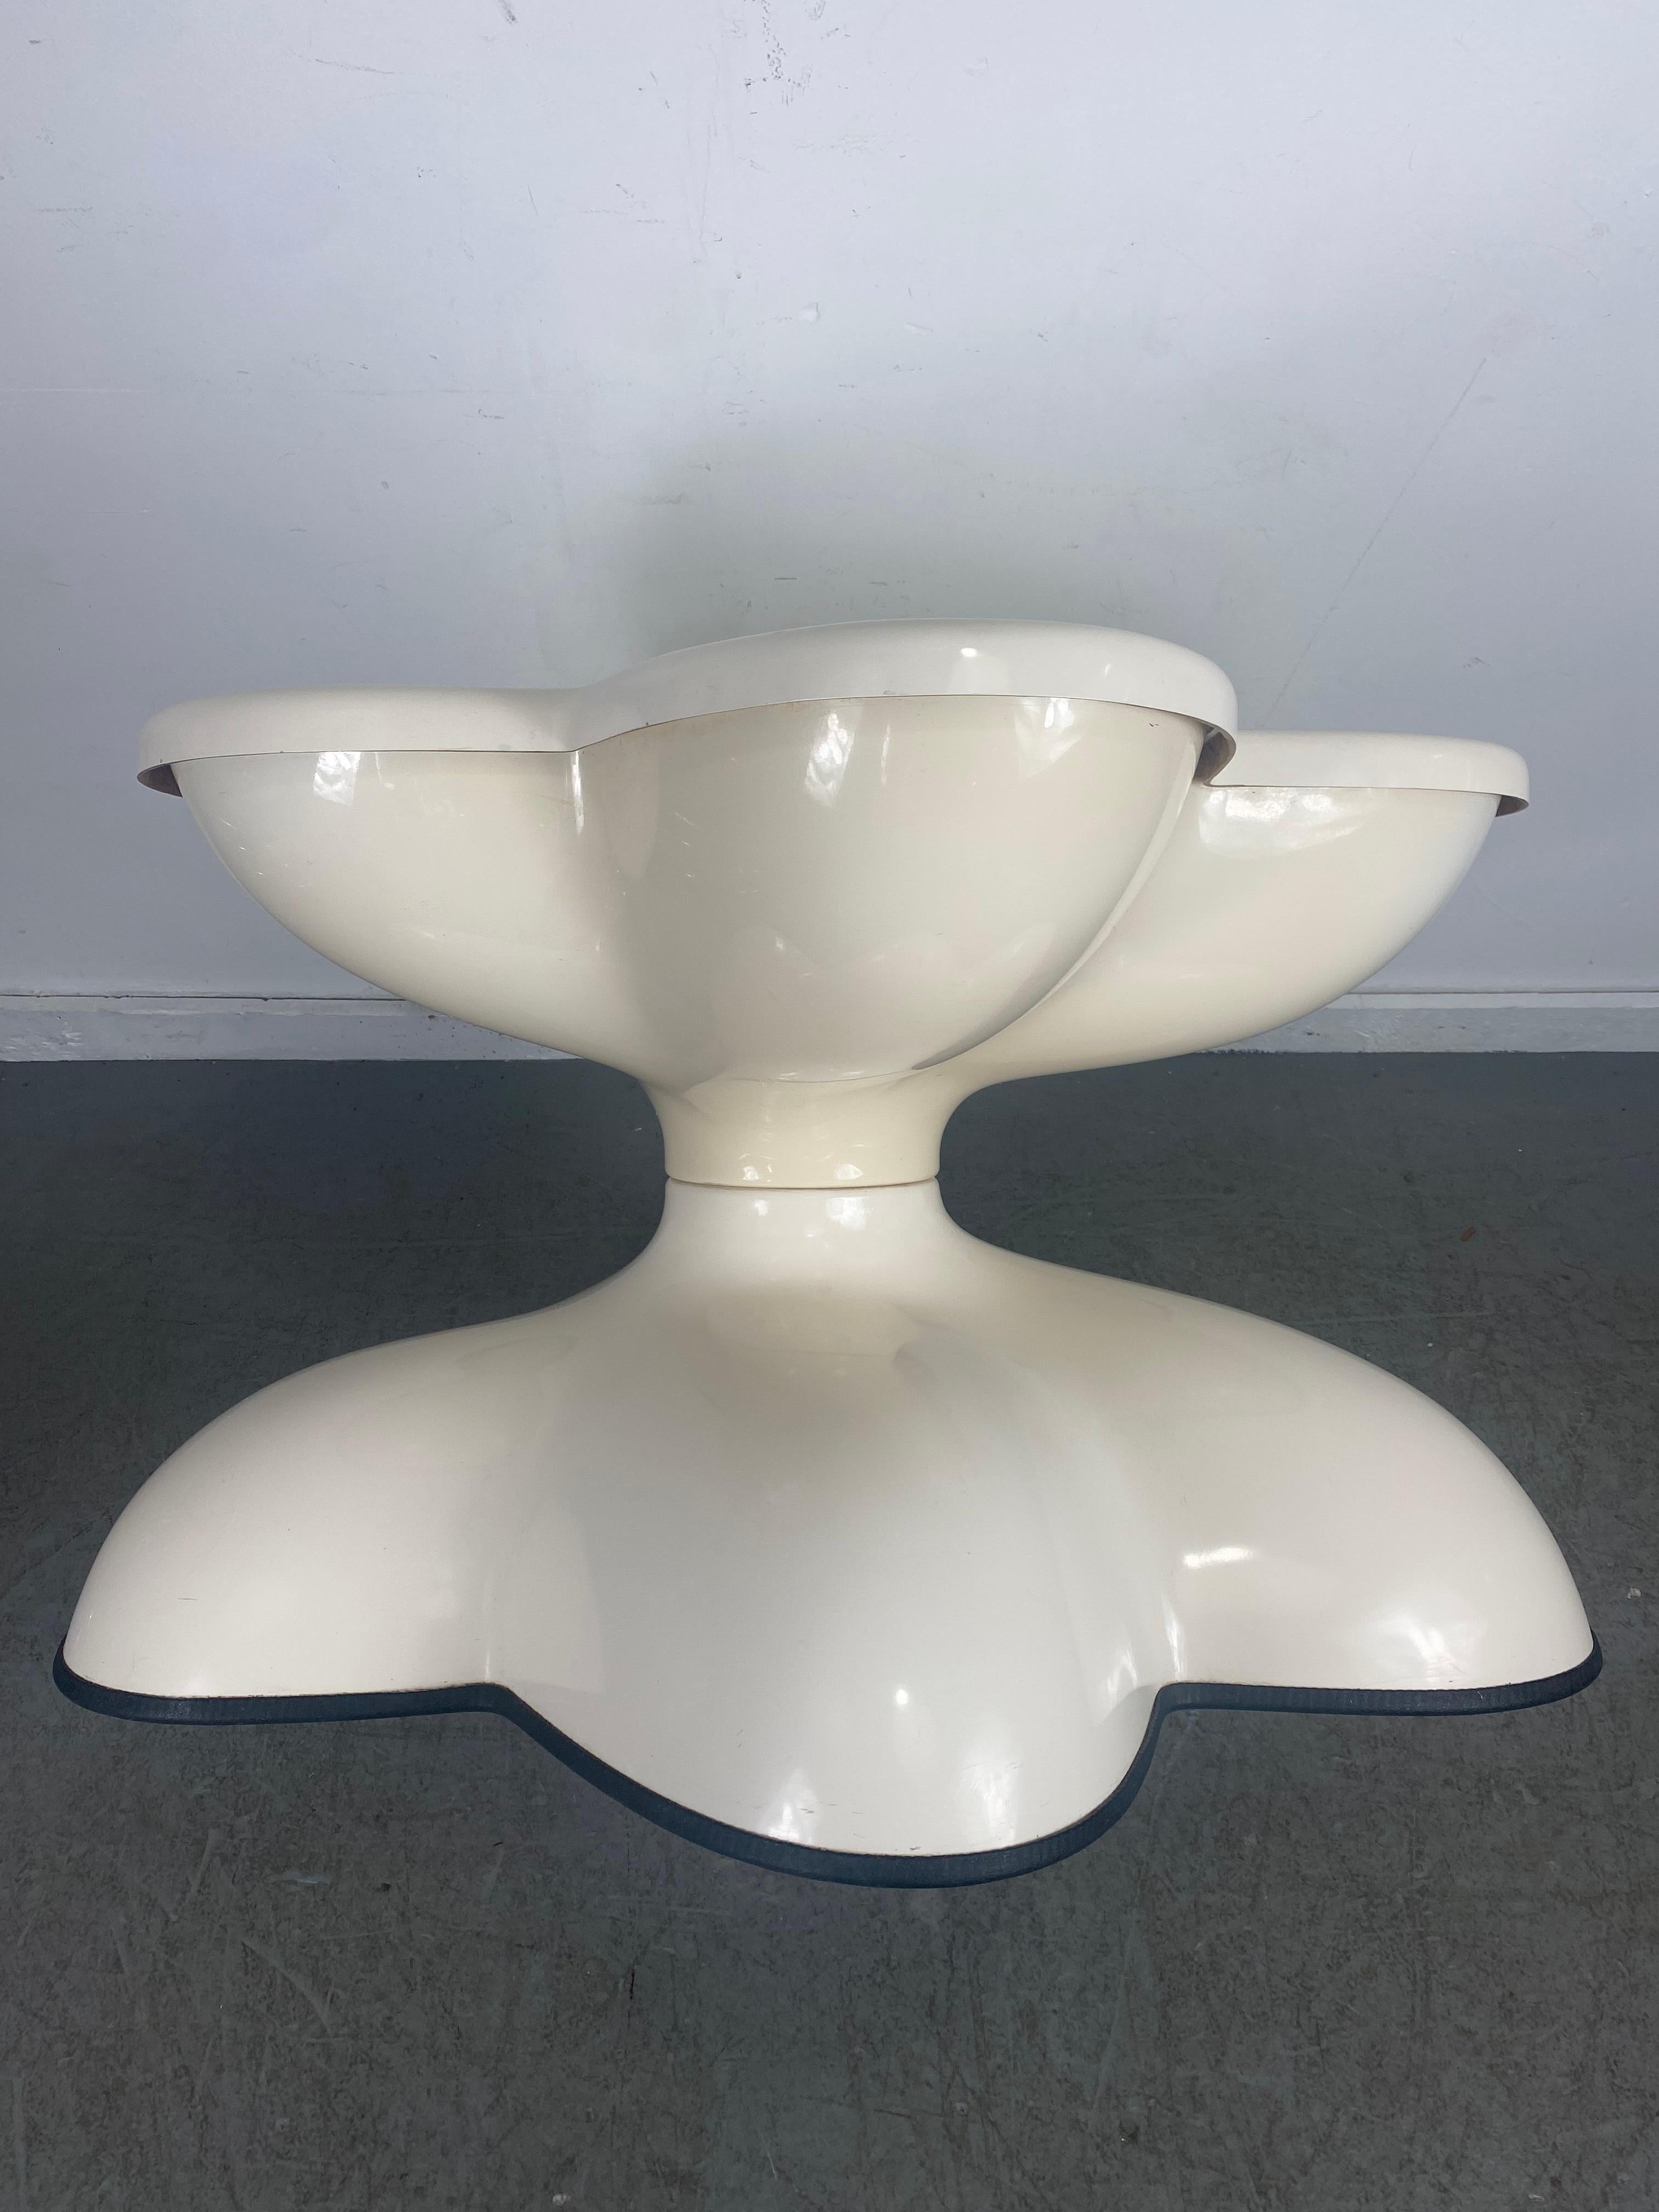 A rare white swivel coffee table from the Molar Group manufactured by Beylerian, circa 1969. Seldom seen. The table is one of the only designs in the molar group that is adjustable by swivel. Made of white gel-coated fiberglass, it still retains